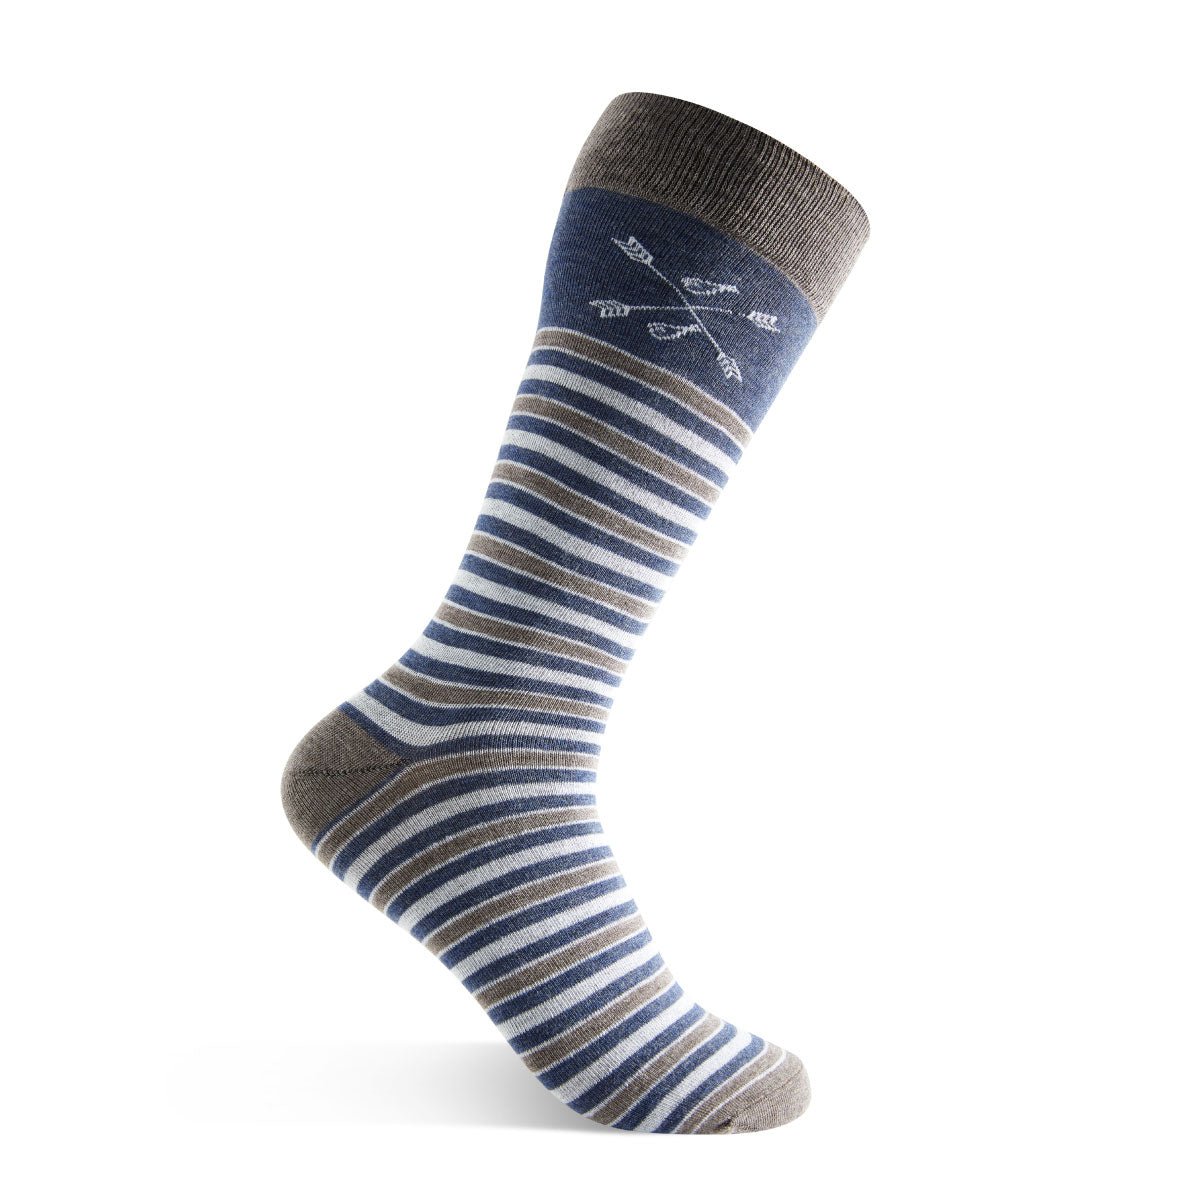 a grey, blue, and white striped men's dress sock